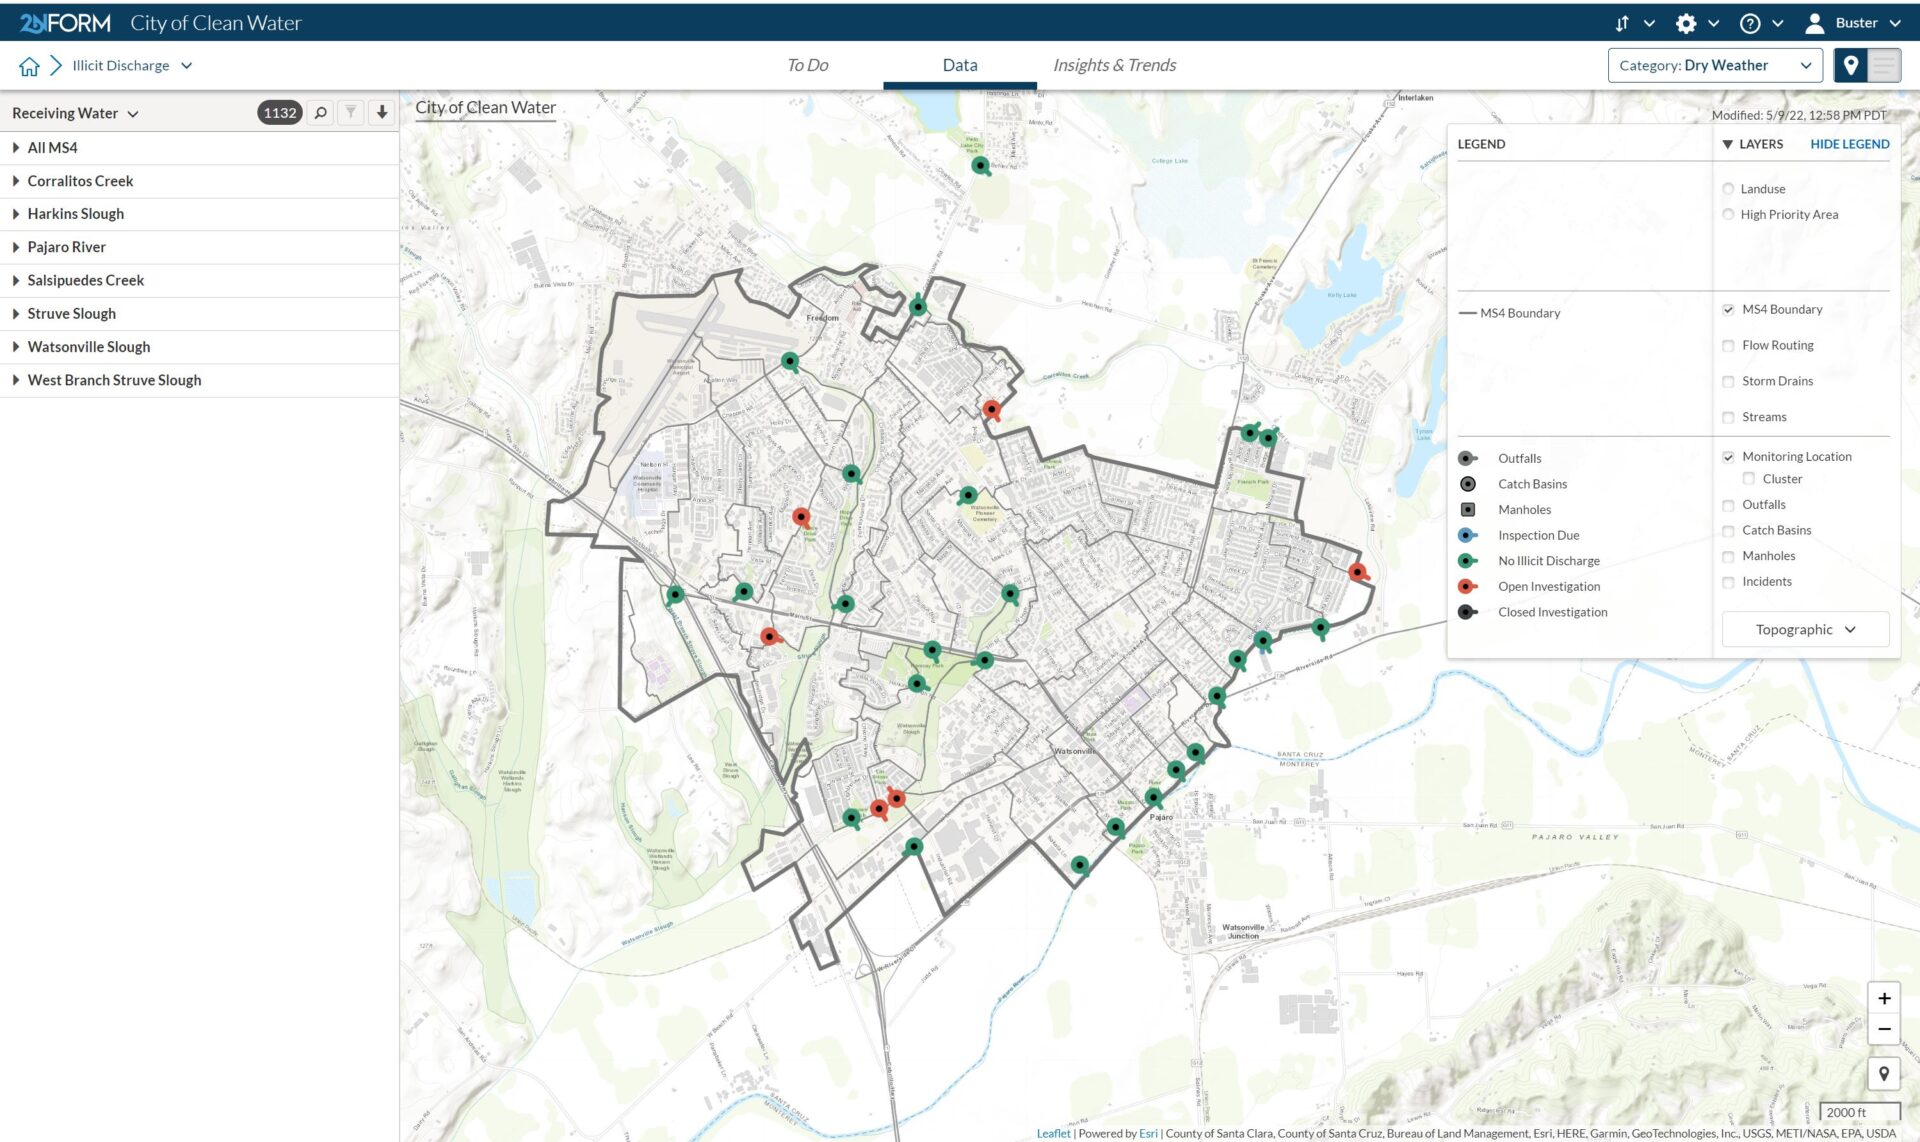 2NFORM stormwater compliance software helps you track outfalls